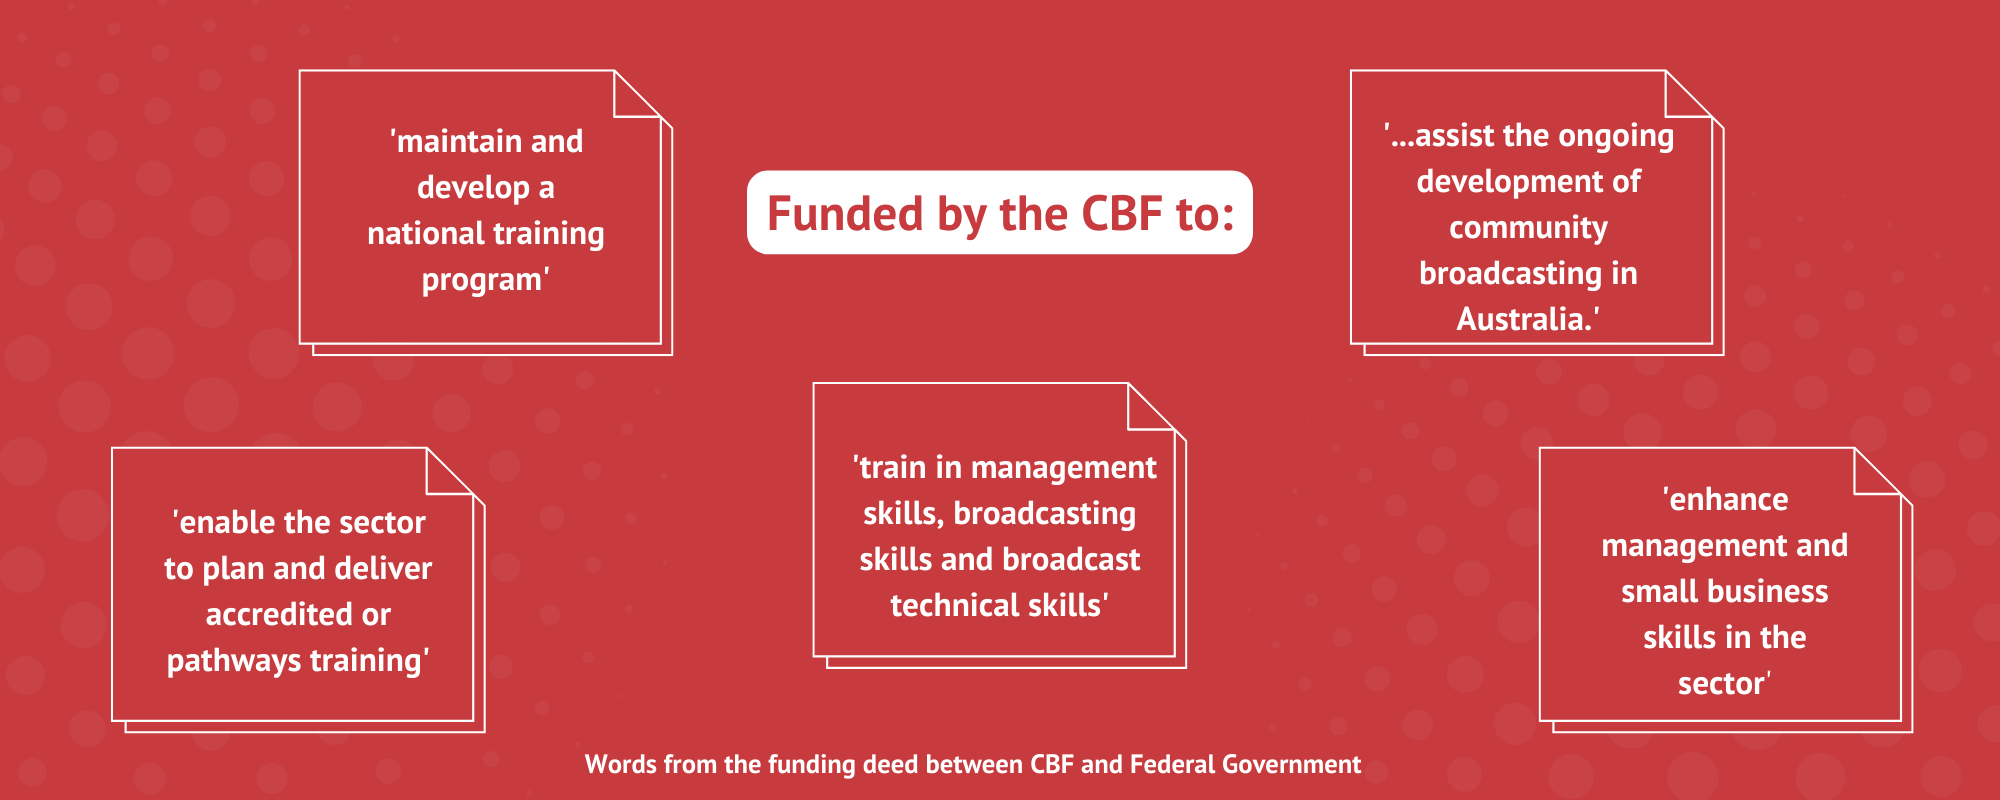 Funded by the CBF to: 'maintain and develop a national training program' '...assist the ongoing development of community broadcasting in Australia.''enable the sector to plan and deliver accredited or pathways training' 'train in management skills, broadcasting skills and broadcast technical skills''enhance management and small business skills in the sector' Words from the funding deed between CBF and Federal Government